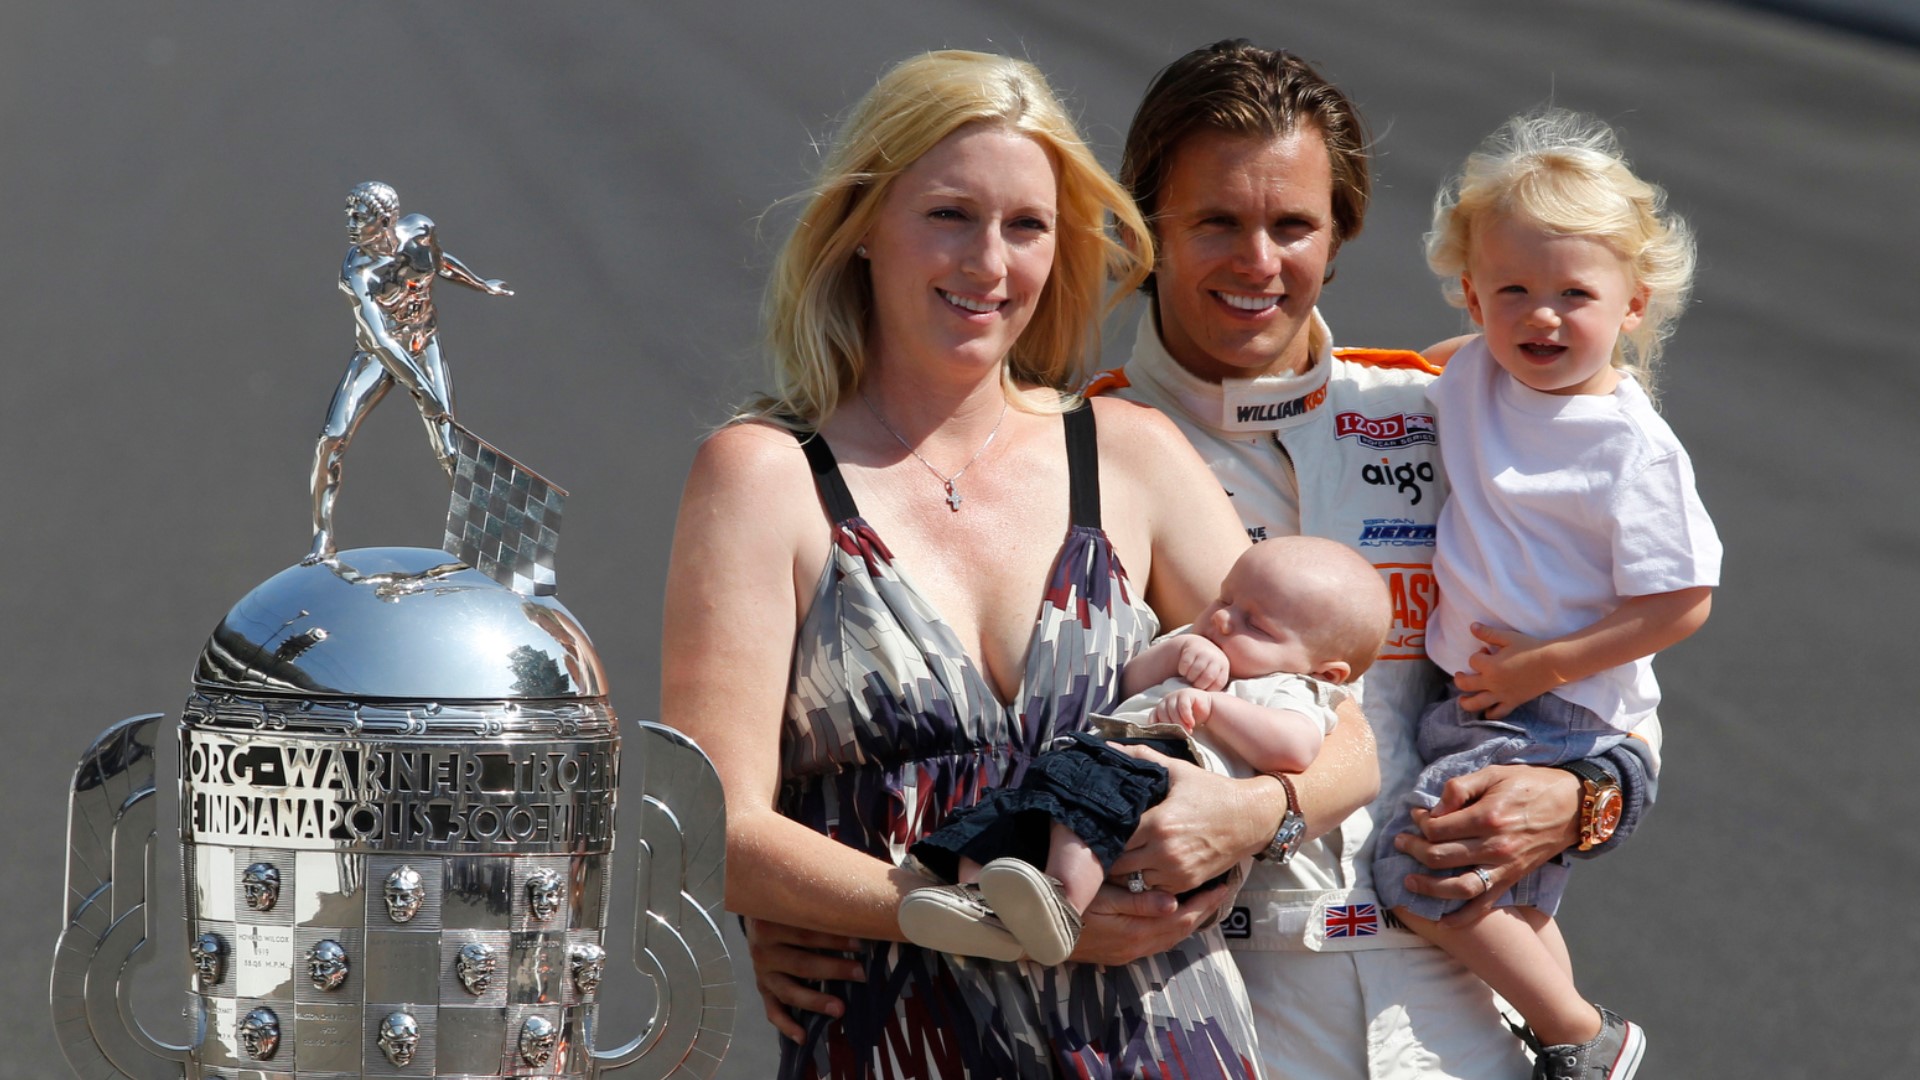 Ten years after his remarkable Indy 500 win and untimely death, Susie Wheldon and her sons are keeping Dan Wheldon's legacy alive.